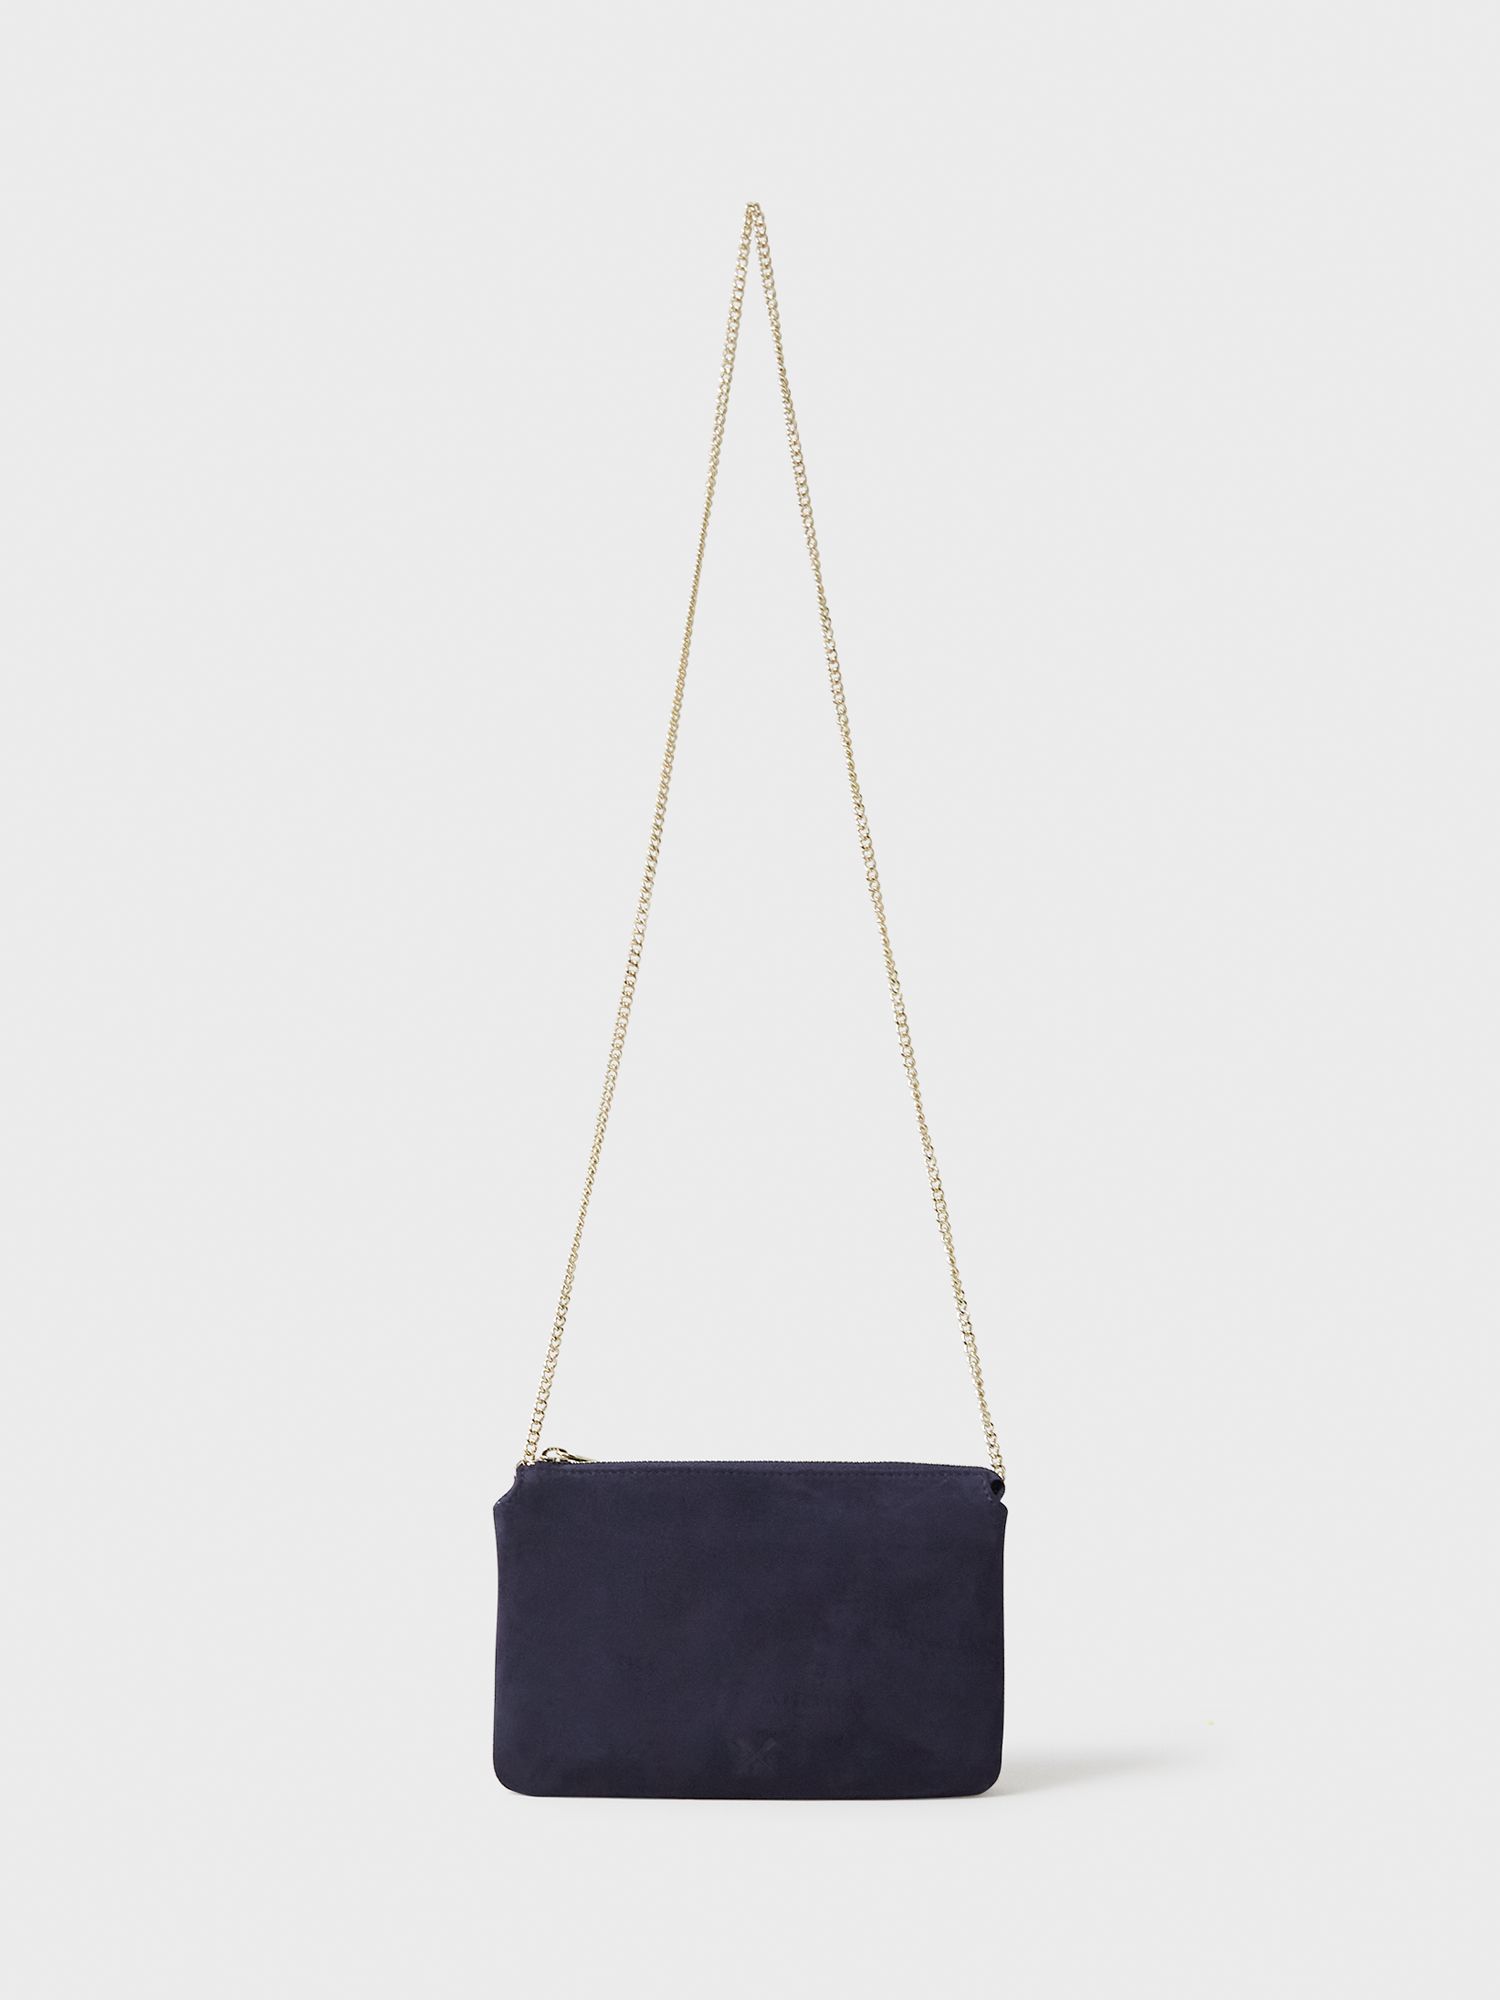 Crew Clothing Occasion Clutch Bag, Navy Blue, One Size